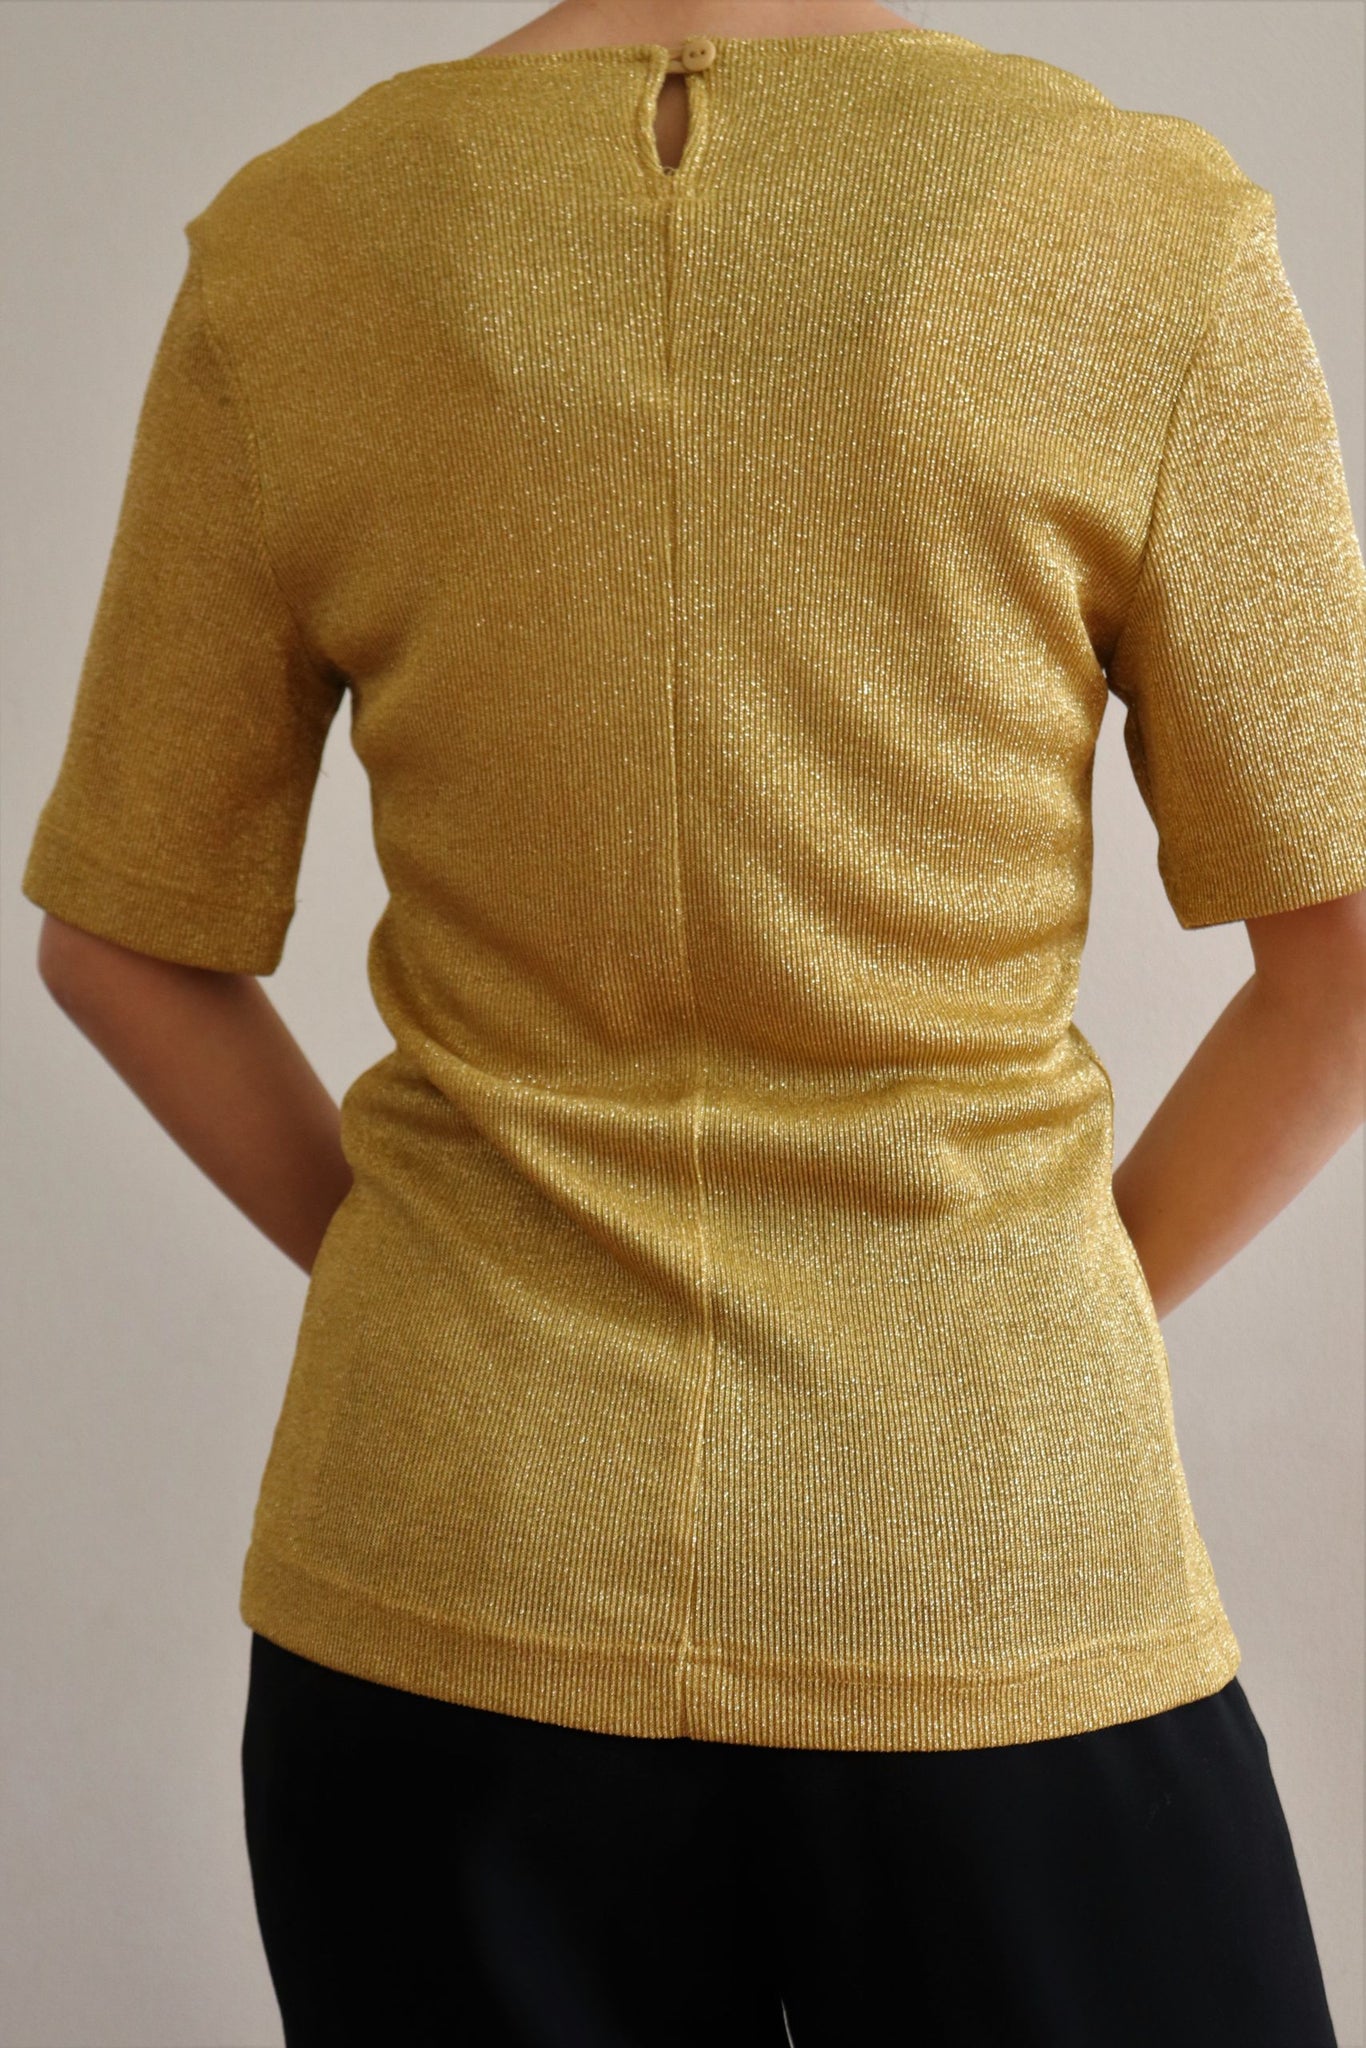 MADE IN USA Vintage Gold Knit